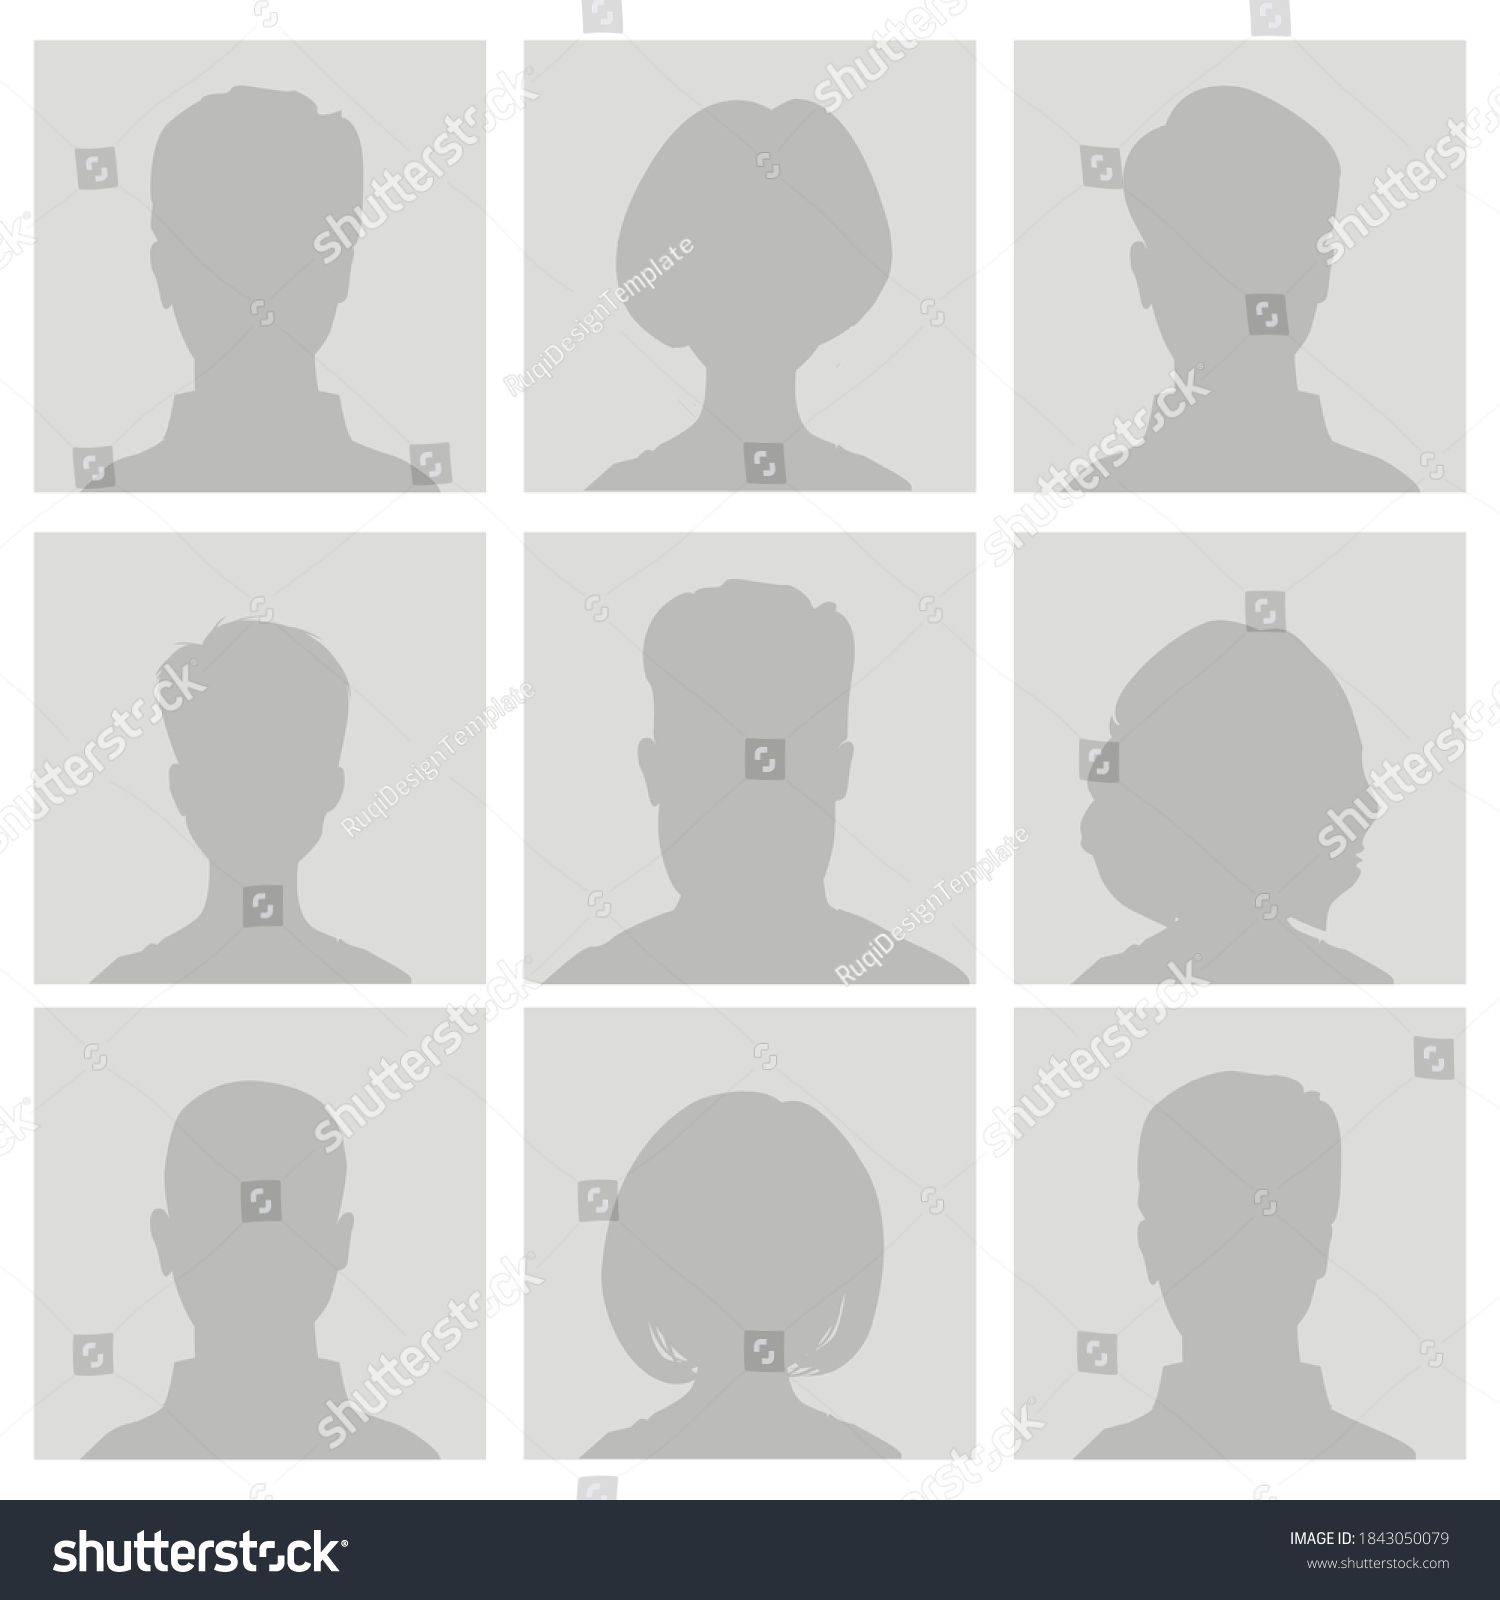 Face placeholder Images, Stock Photos & Vectors | Shutterstock